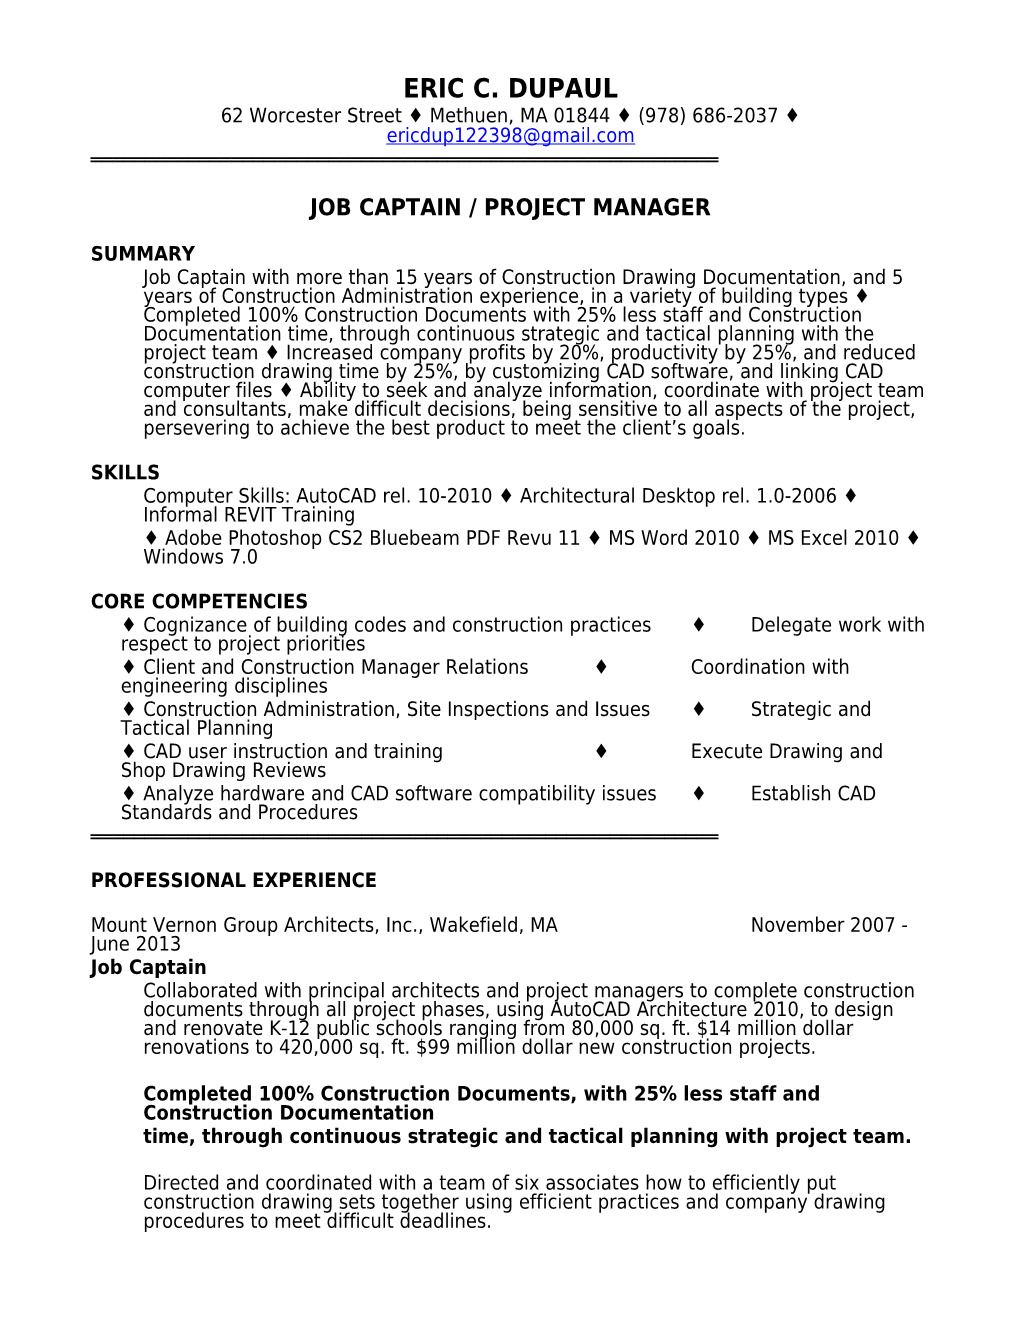 Job Captain / Project Manager